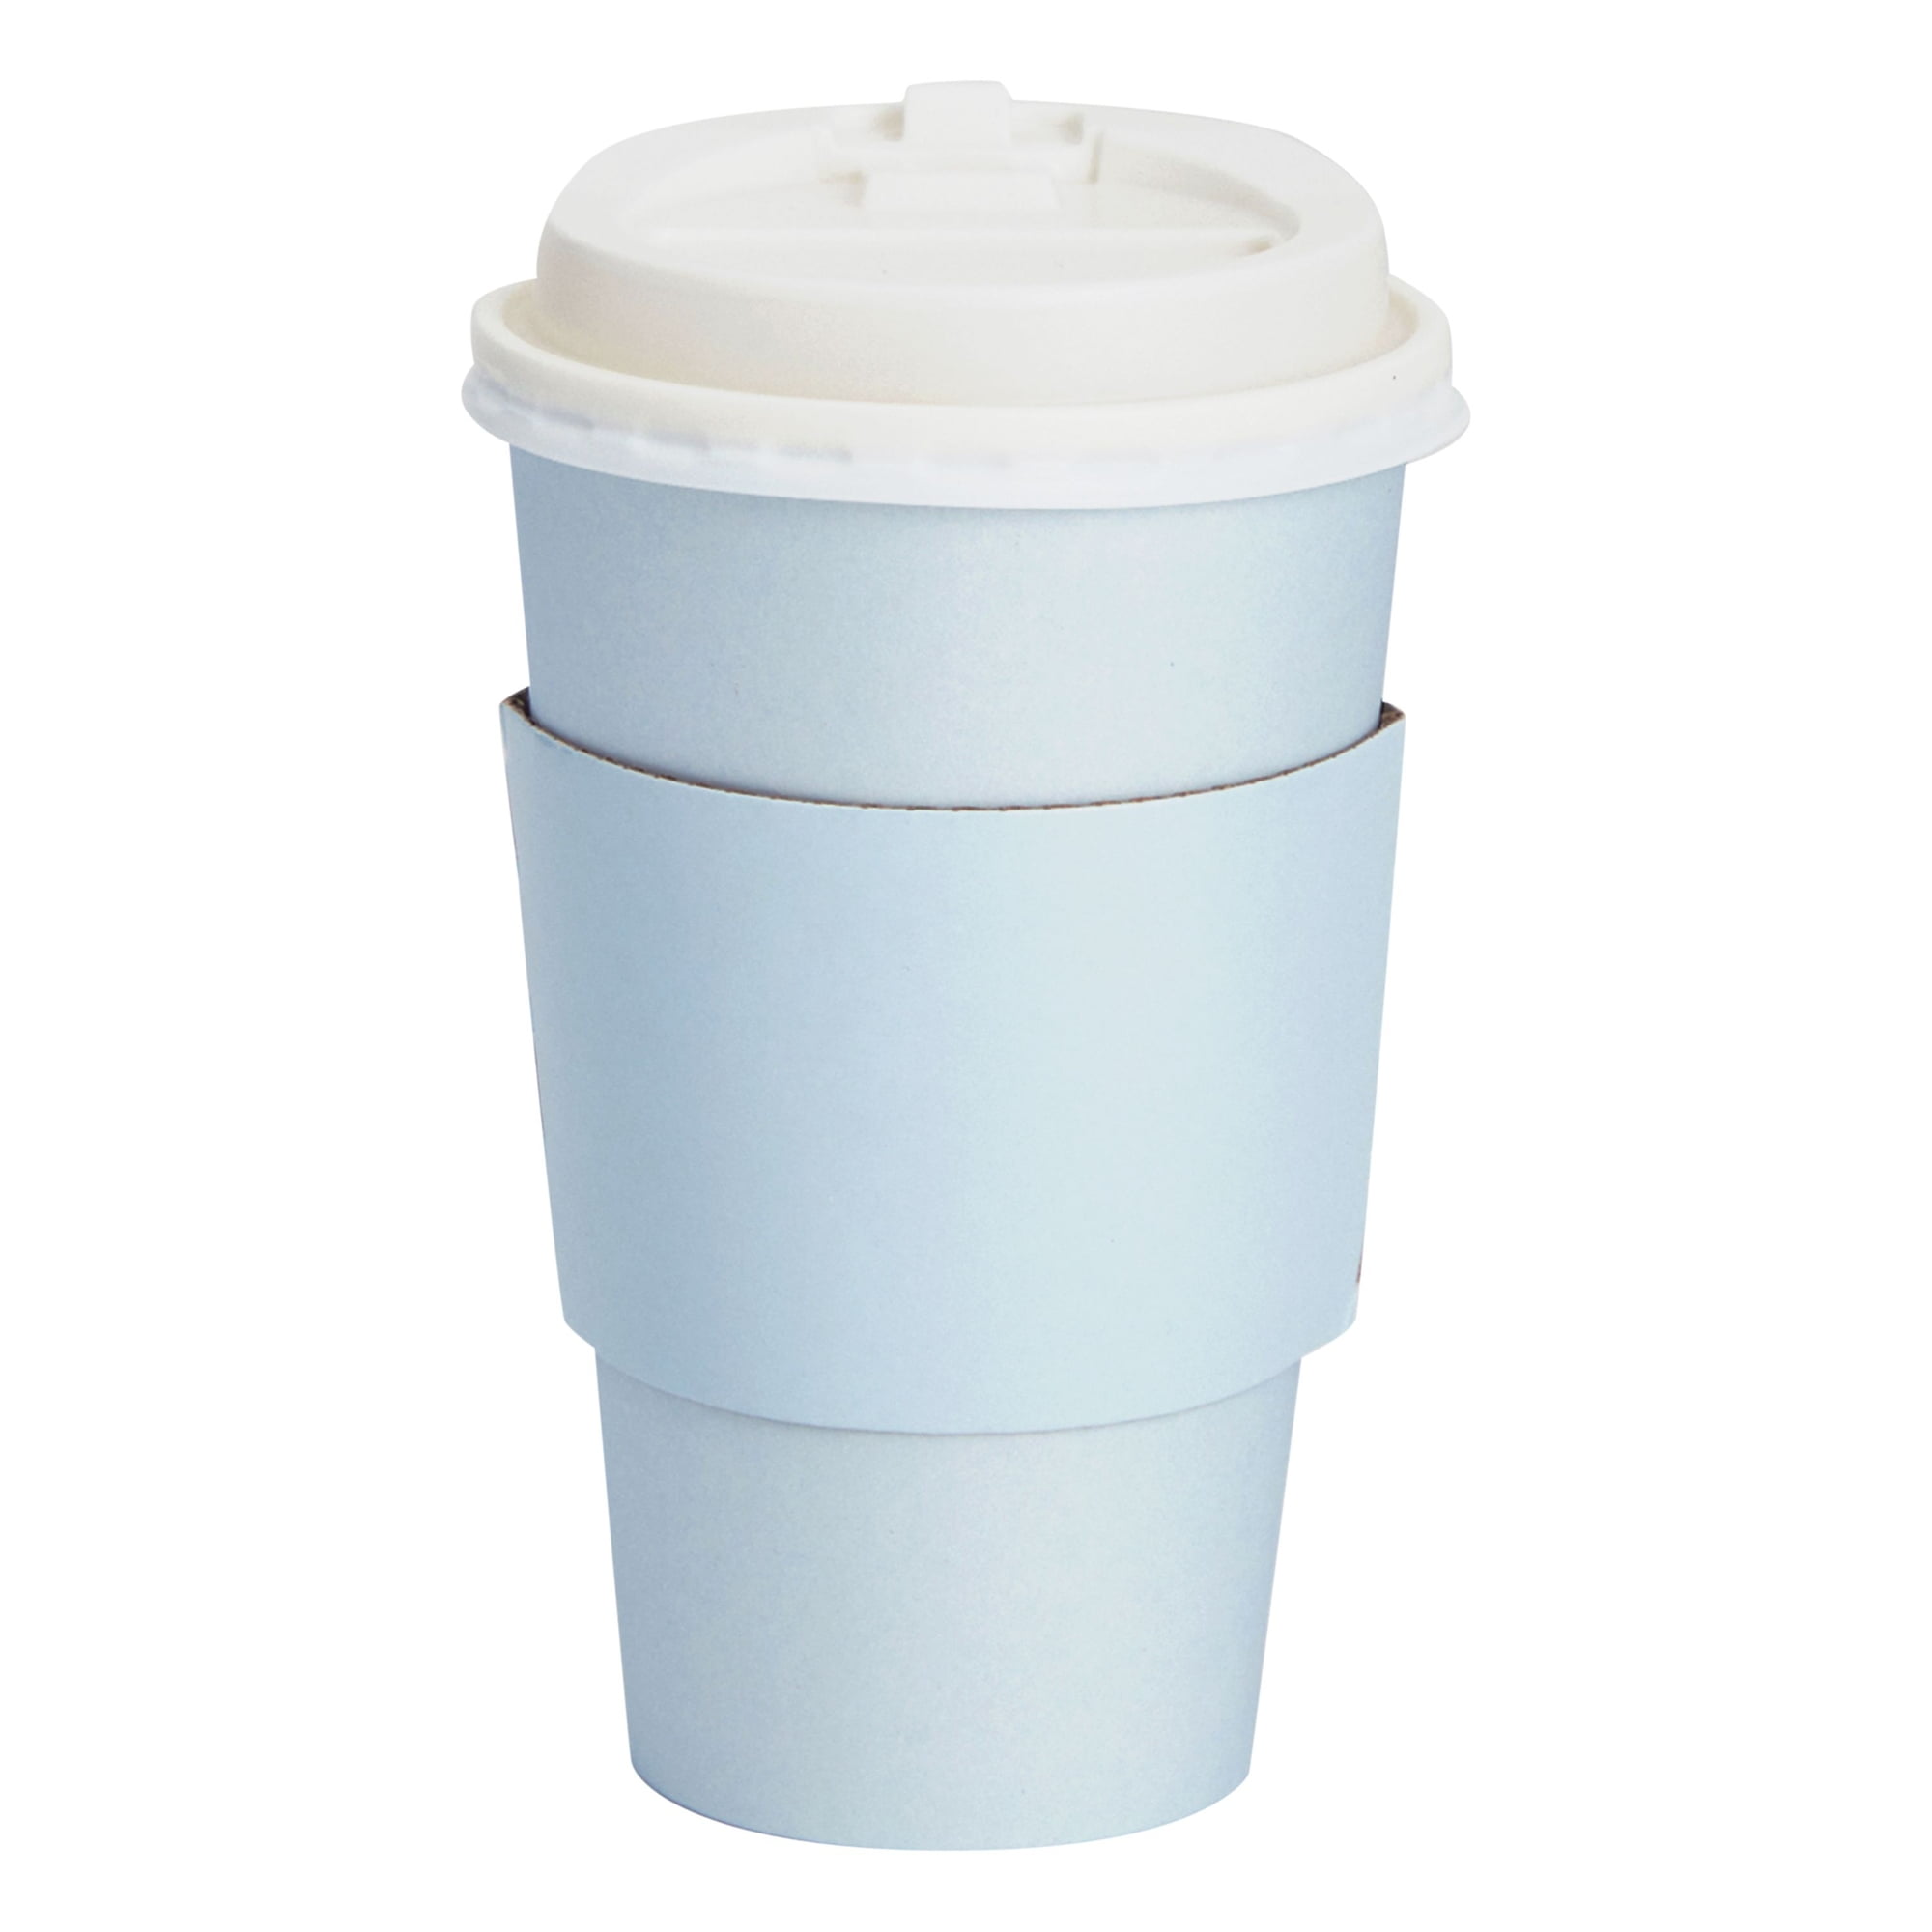 Blue Panda 48-Pack Donut Insulated Disposable Coffee Cups with Lids 16oz Paper Hot Cup to Go